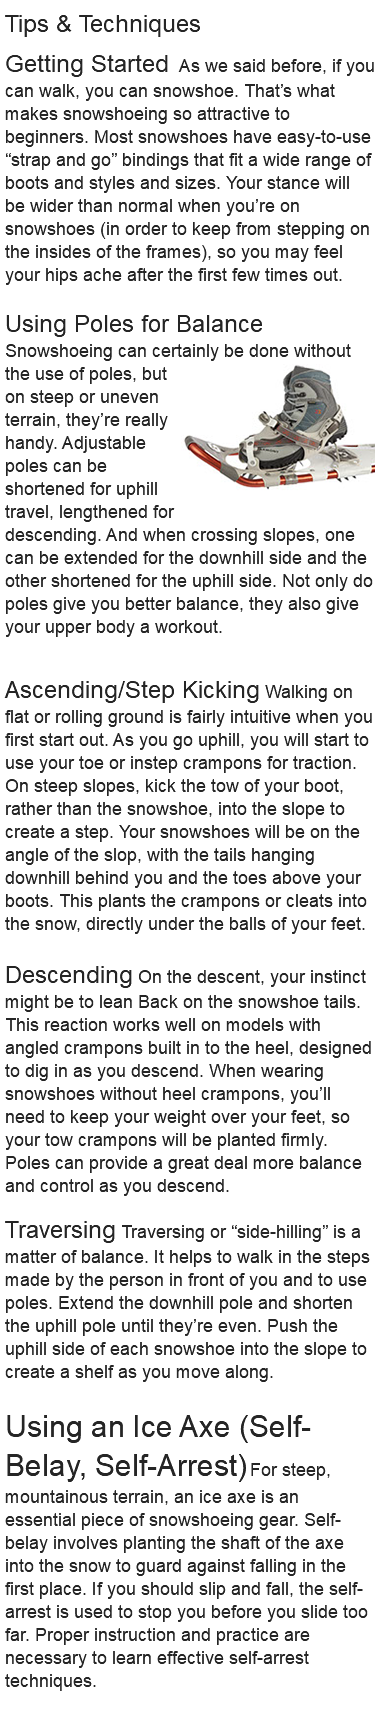 Tips & Techniques Getting Started As we said before, if you can walk, you can snowshoe. That’s what makes snowshoeing so attractive to beginners. Most snowshoes have easy-to-use “strap and go” bindings that fit a wide range of boots and styles and sizes. Your stance will be wider than normal when you’re on snowshoes (in order to keep from stepping on the insides of the frames), so you may feel your hips ache after the first few times out. Using Poles for Balance Snowshoeing can certainly be﷯ done without the use of poles, but on steep or uneven terrain, they’re really handy. Adjustable poles can be shortened for uphill travel, lengthened for descending. And when crossing slopes, one can be extended for the downhill side and the other shortened for the uphill side. Not only do poles give you better balance, they also give your upper body a workout. Ascending/Step Kicking Walking on flat or rolling ground is fairly intuitive when you first start out. As you go uphill, you will start to use your toe or instep crampons for traction. On steep slopes, kick the tow of your boot, rather than the snowshoe, into the slope to create a step. Your snowshoes will be on the angle of the slop, with the tails hanging downhill behind you and the toes above your boots. This plants the crampons or cleats into the snow, directly under the balls of your feet. Descending On the descent, your instinct might be to lean Back on the snowshoe tails. This reaction works well on models with angled crampons built in to the heel, designed to dig in as you descend. When wearing snowshoes without heel crampons, you’ll need to keep your weight over your feet, so your tow crampons will be planted firmly. Poles can provide a great deal more balance and control as you descend. Traversing Traversing or “side-hilling” is a matter of balance. It helps to walk in the steps made by the person in front of you and to use poles. Extend the downhill pole and shorten the uphill pole until they’re even. Push the uphill side of each snowshoe into the slope to create a shelf as you move along. Using an Ice Axe (Self-Belay, Self-Arrest) For steep, mountainous terrain, an ice axe is an essential piece of snowshoeing gear. Self-belay involves planting the shaft of the axe into the snow to guard against falling in the first place. If you should slip and fall, the self-arrest is used to stop you before you slide too far. Proper instruction and practice are necessary to learn effective self-arrest techniques. 